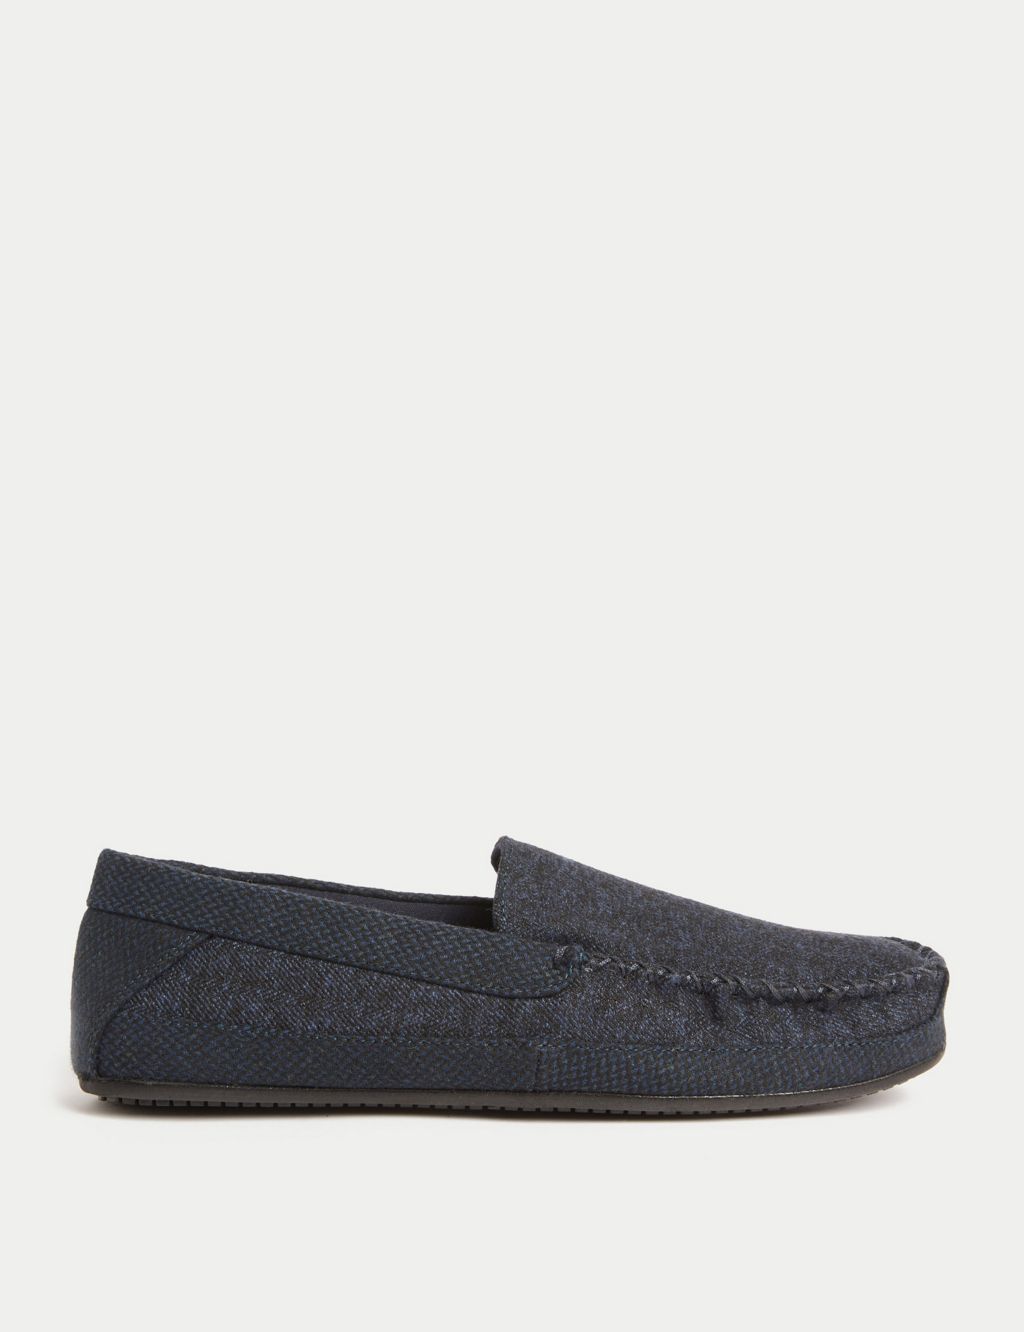 Moccasin Slippers image 1